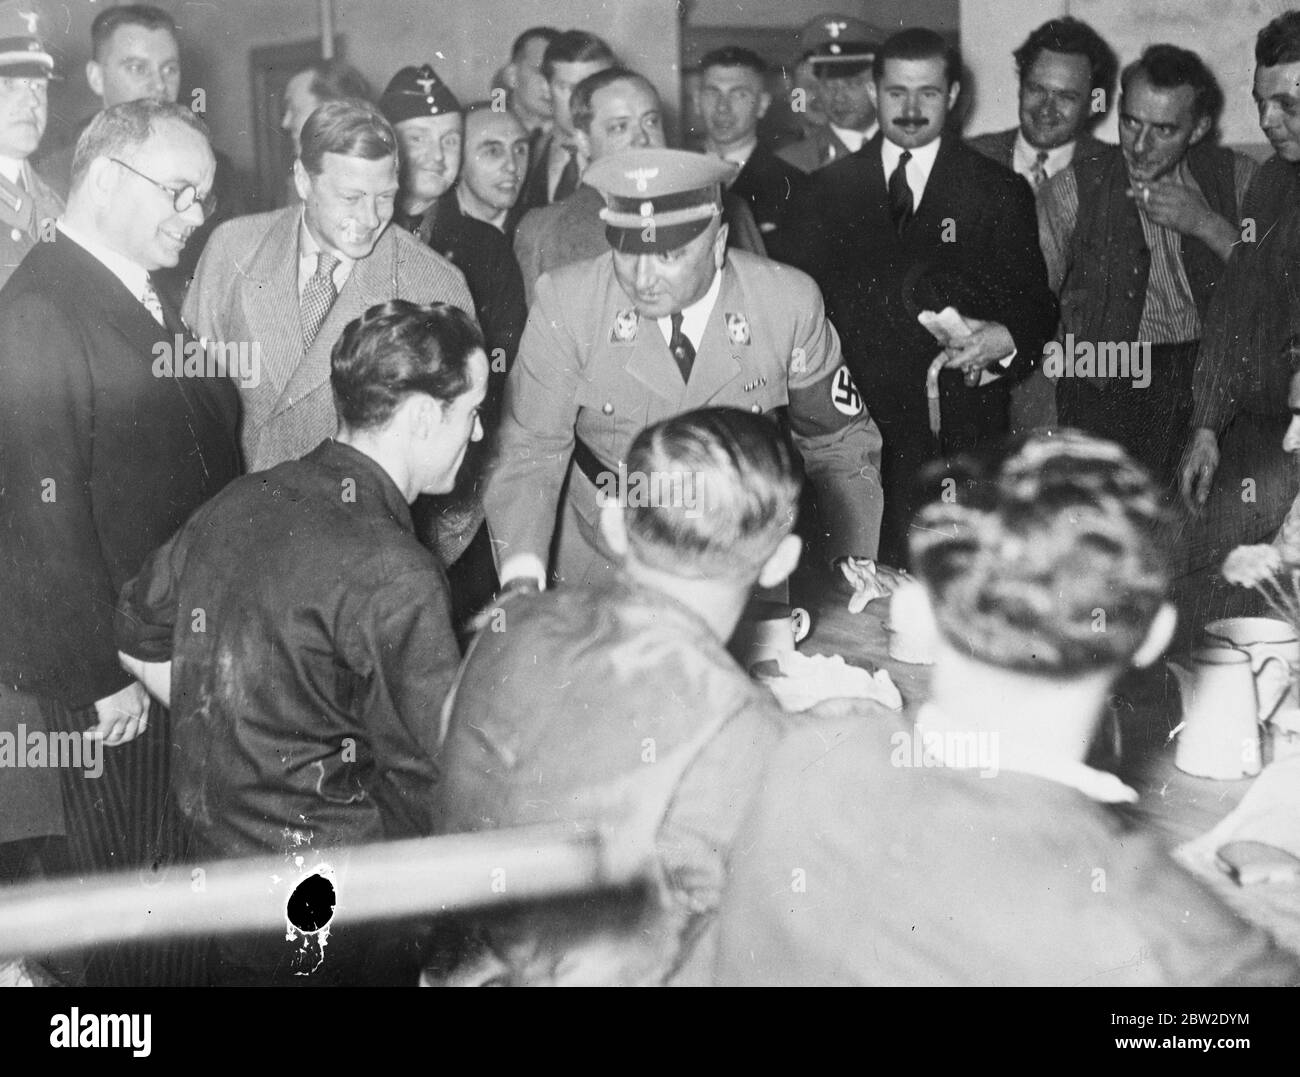 Making his first visit to the city in 13 years the Duke of Windsor was welcomed by the workers when he made his preliminary inspection of factories in by them, as quoted by German officials. The Duchess may man arrested at hotel the Duke of Windsor is to study housing and factory conditions and Germany before going to America on a similar mission. 11 October 1937. Stock Photo